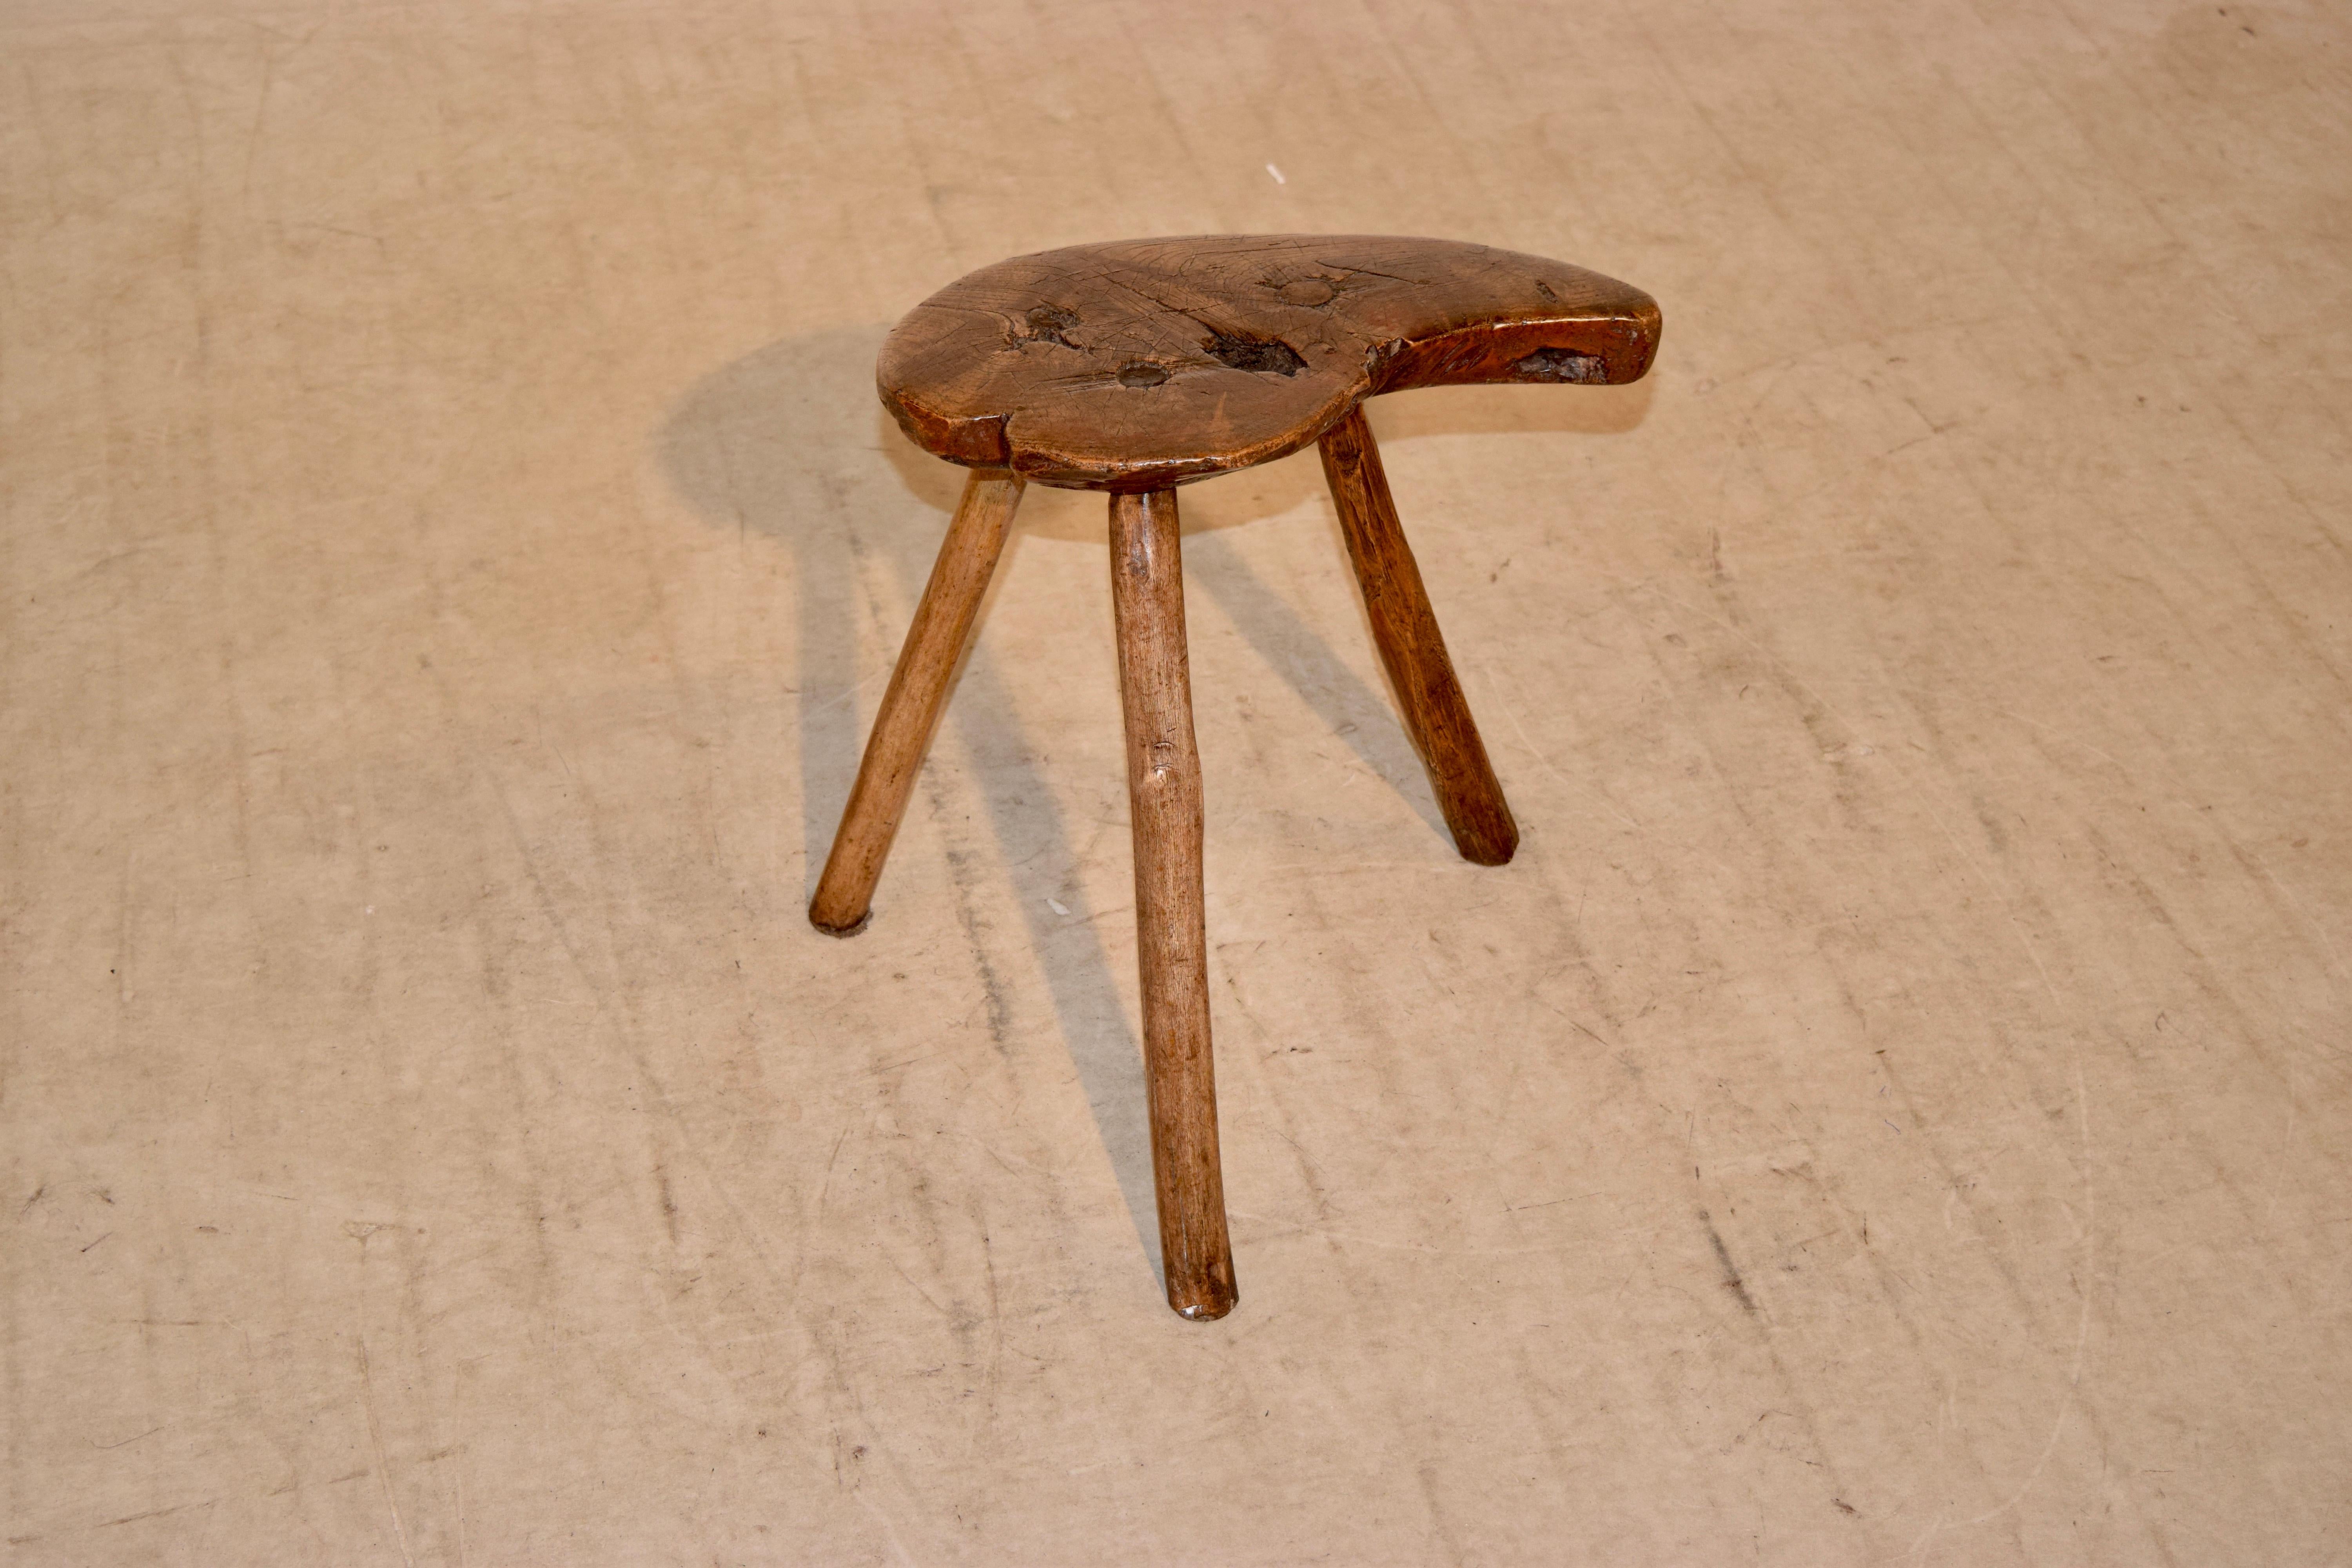 19th century American stool made from burl walnut and hickory. This stool is most likely Southern Americana and is a very rare find. The seat is heart shaped and is made form burl walnut, supported on splayed hickory legs.